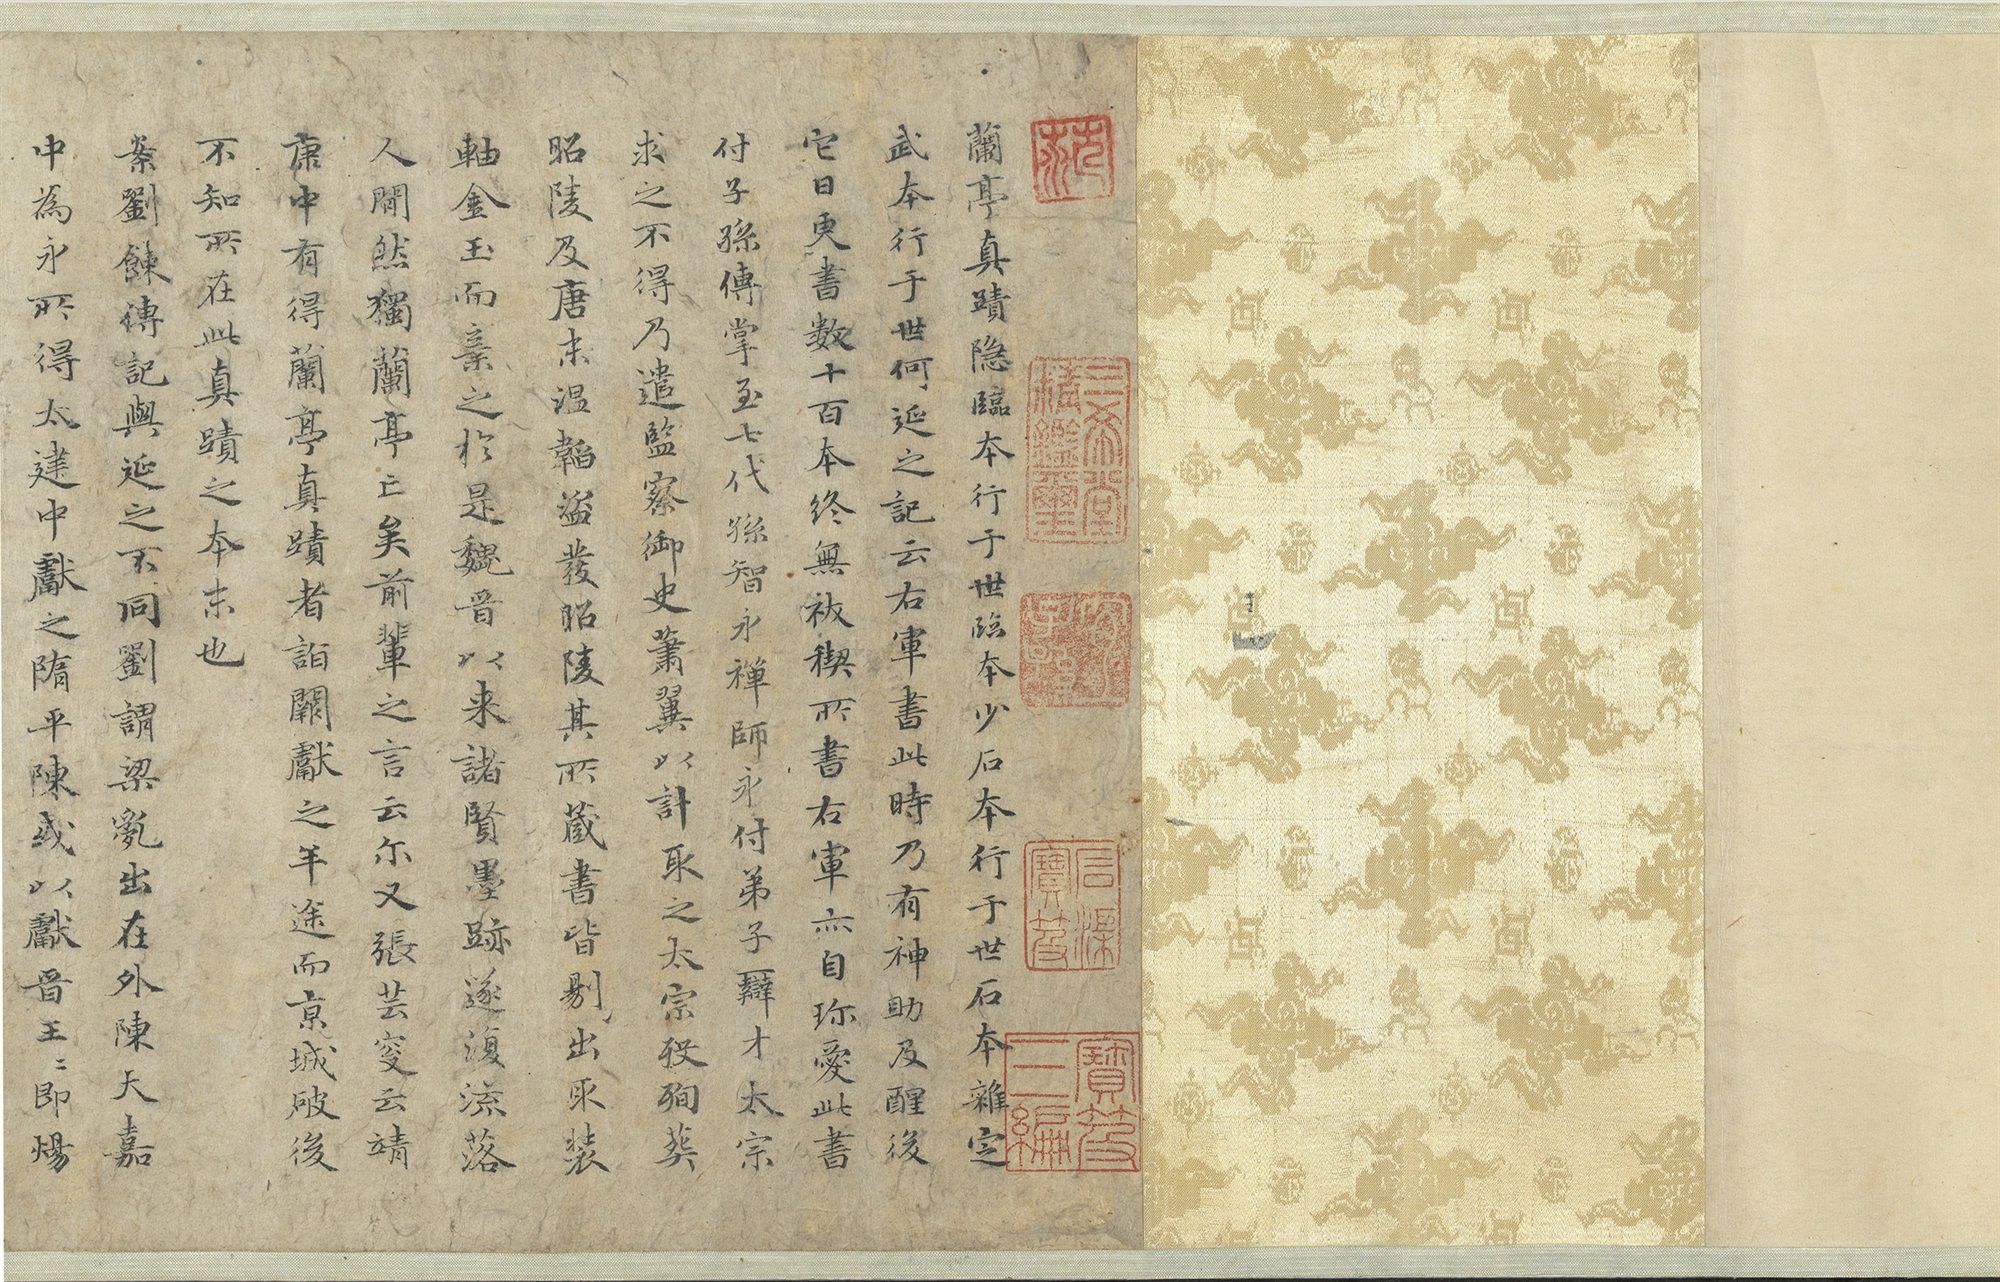 On the Origins of the “Orchid Pavilion Preface” Zhao Mengfu, Yuan dynastypreview